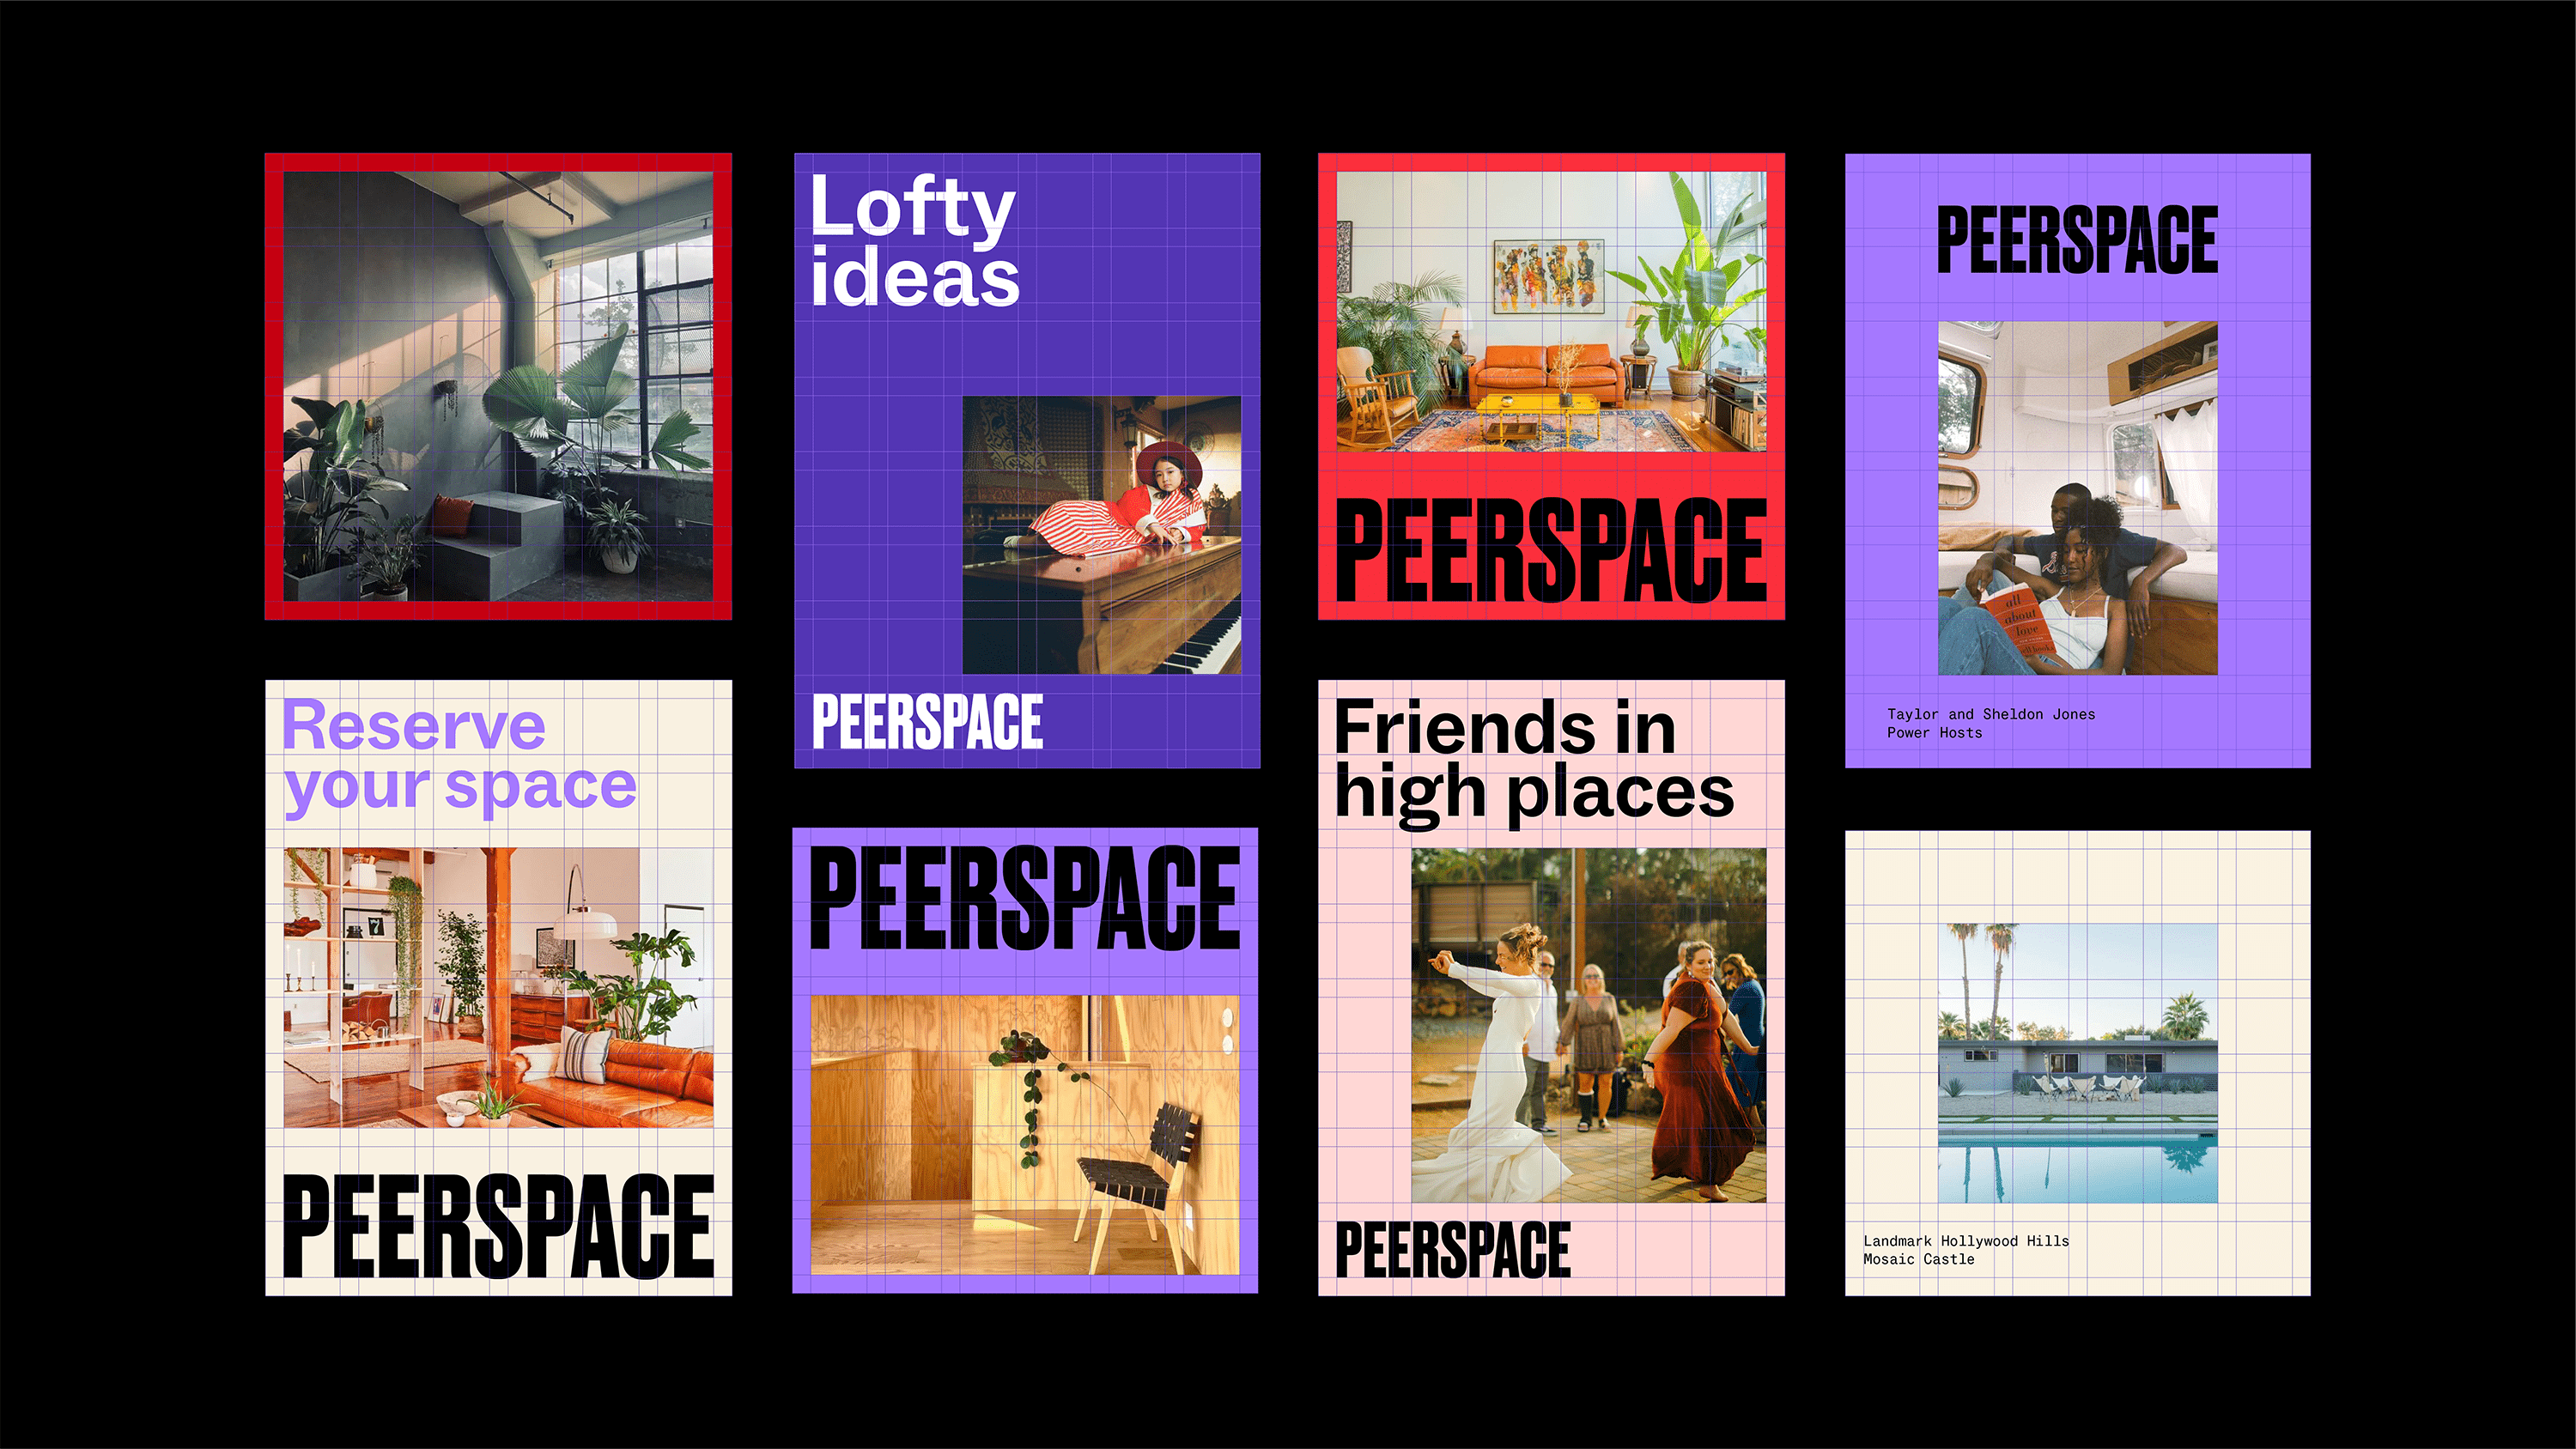 Brand identity and social media assets for peer-owned venue business Peerspace, designed by Mother Design. Reviewed by Eleanor Robertson for BP&O.